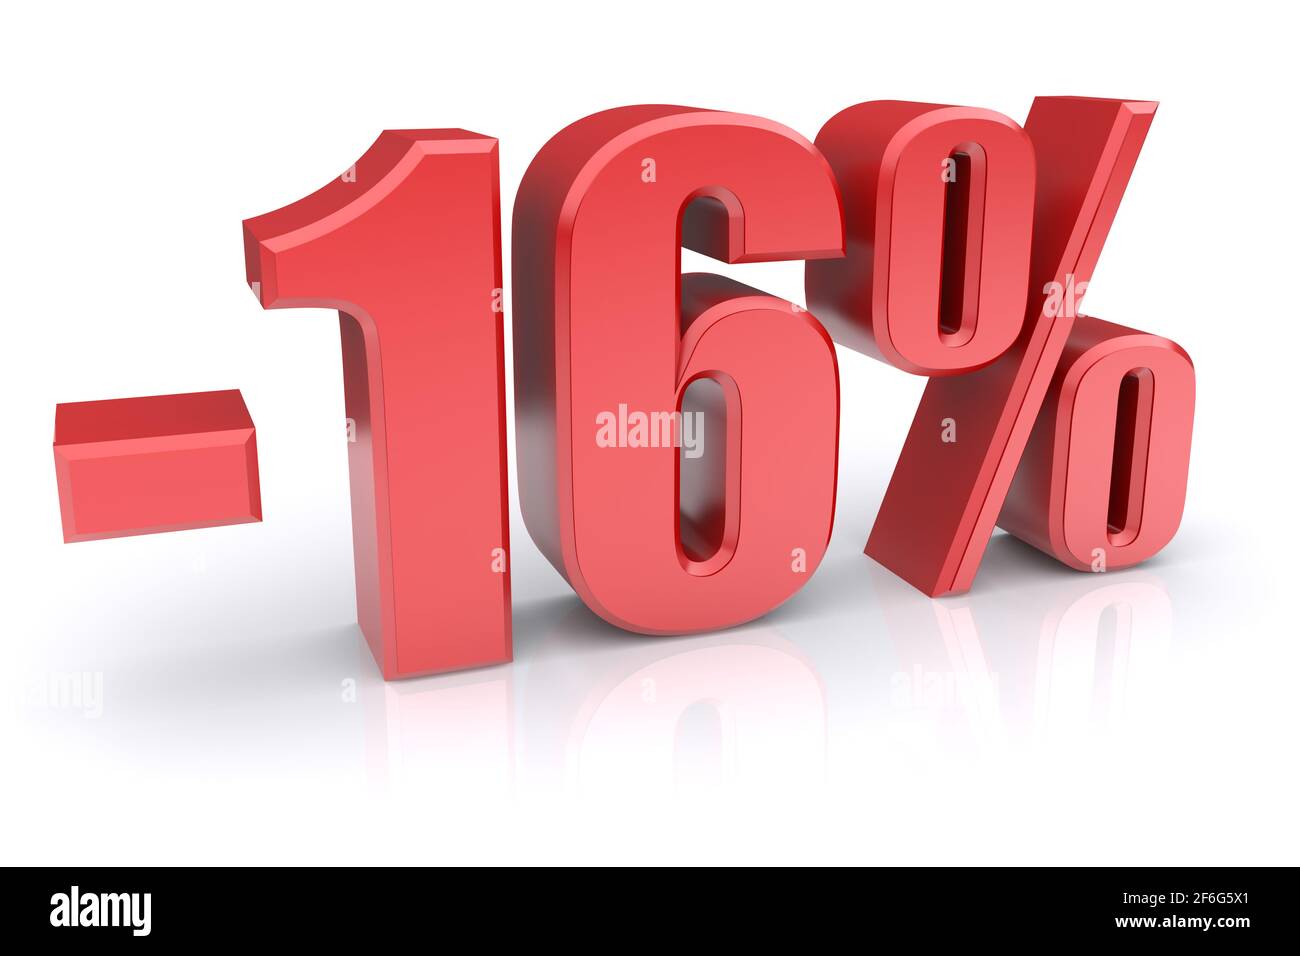 16% discount icon on a white background. 3d rendered image Stock Photo